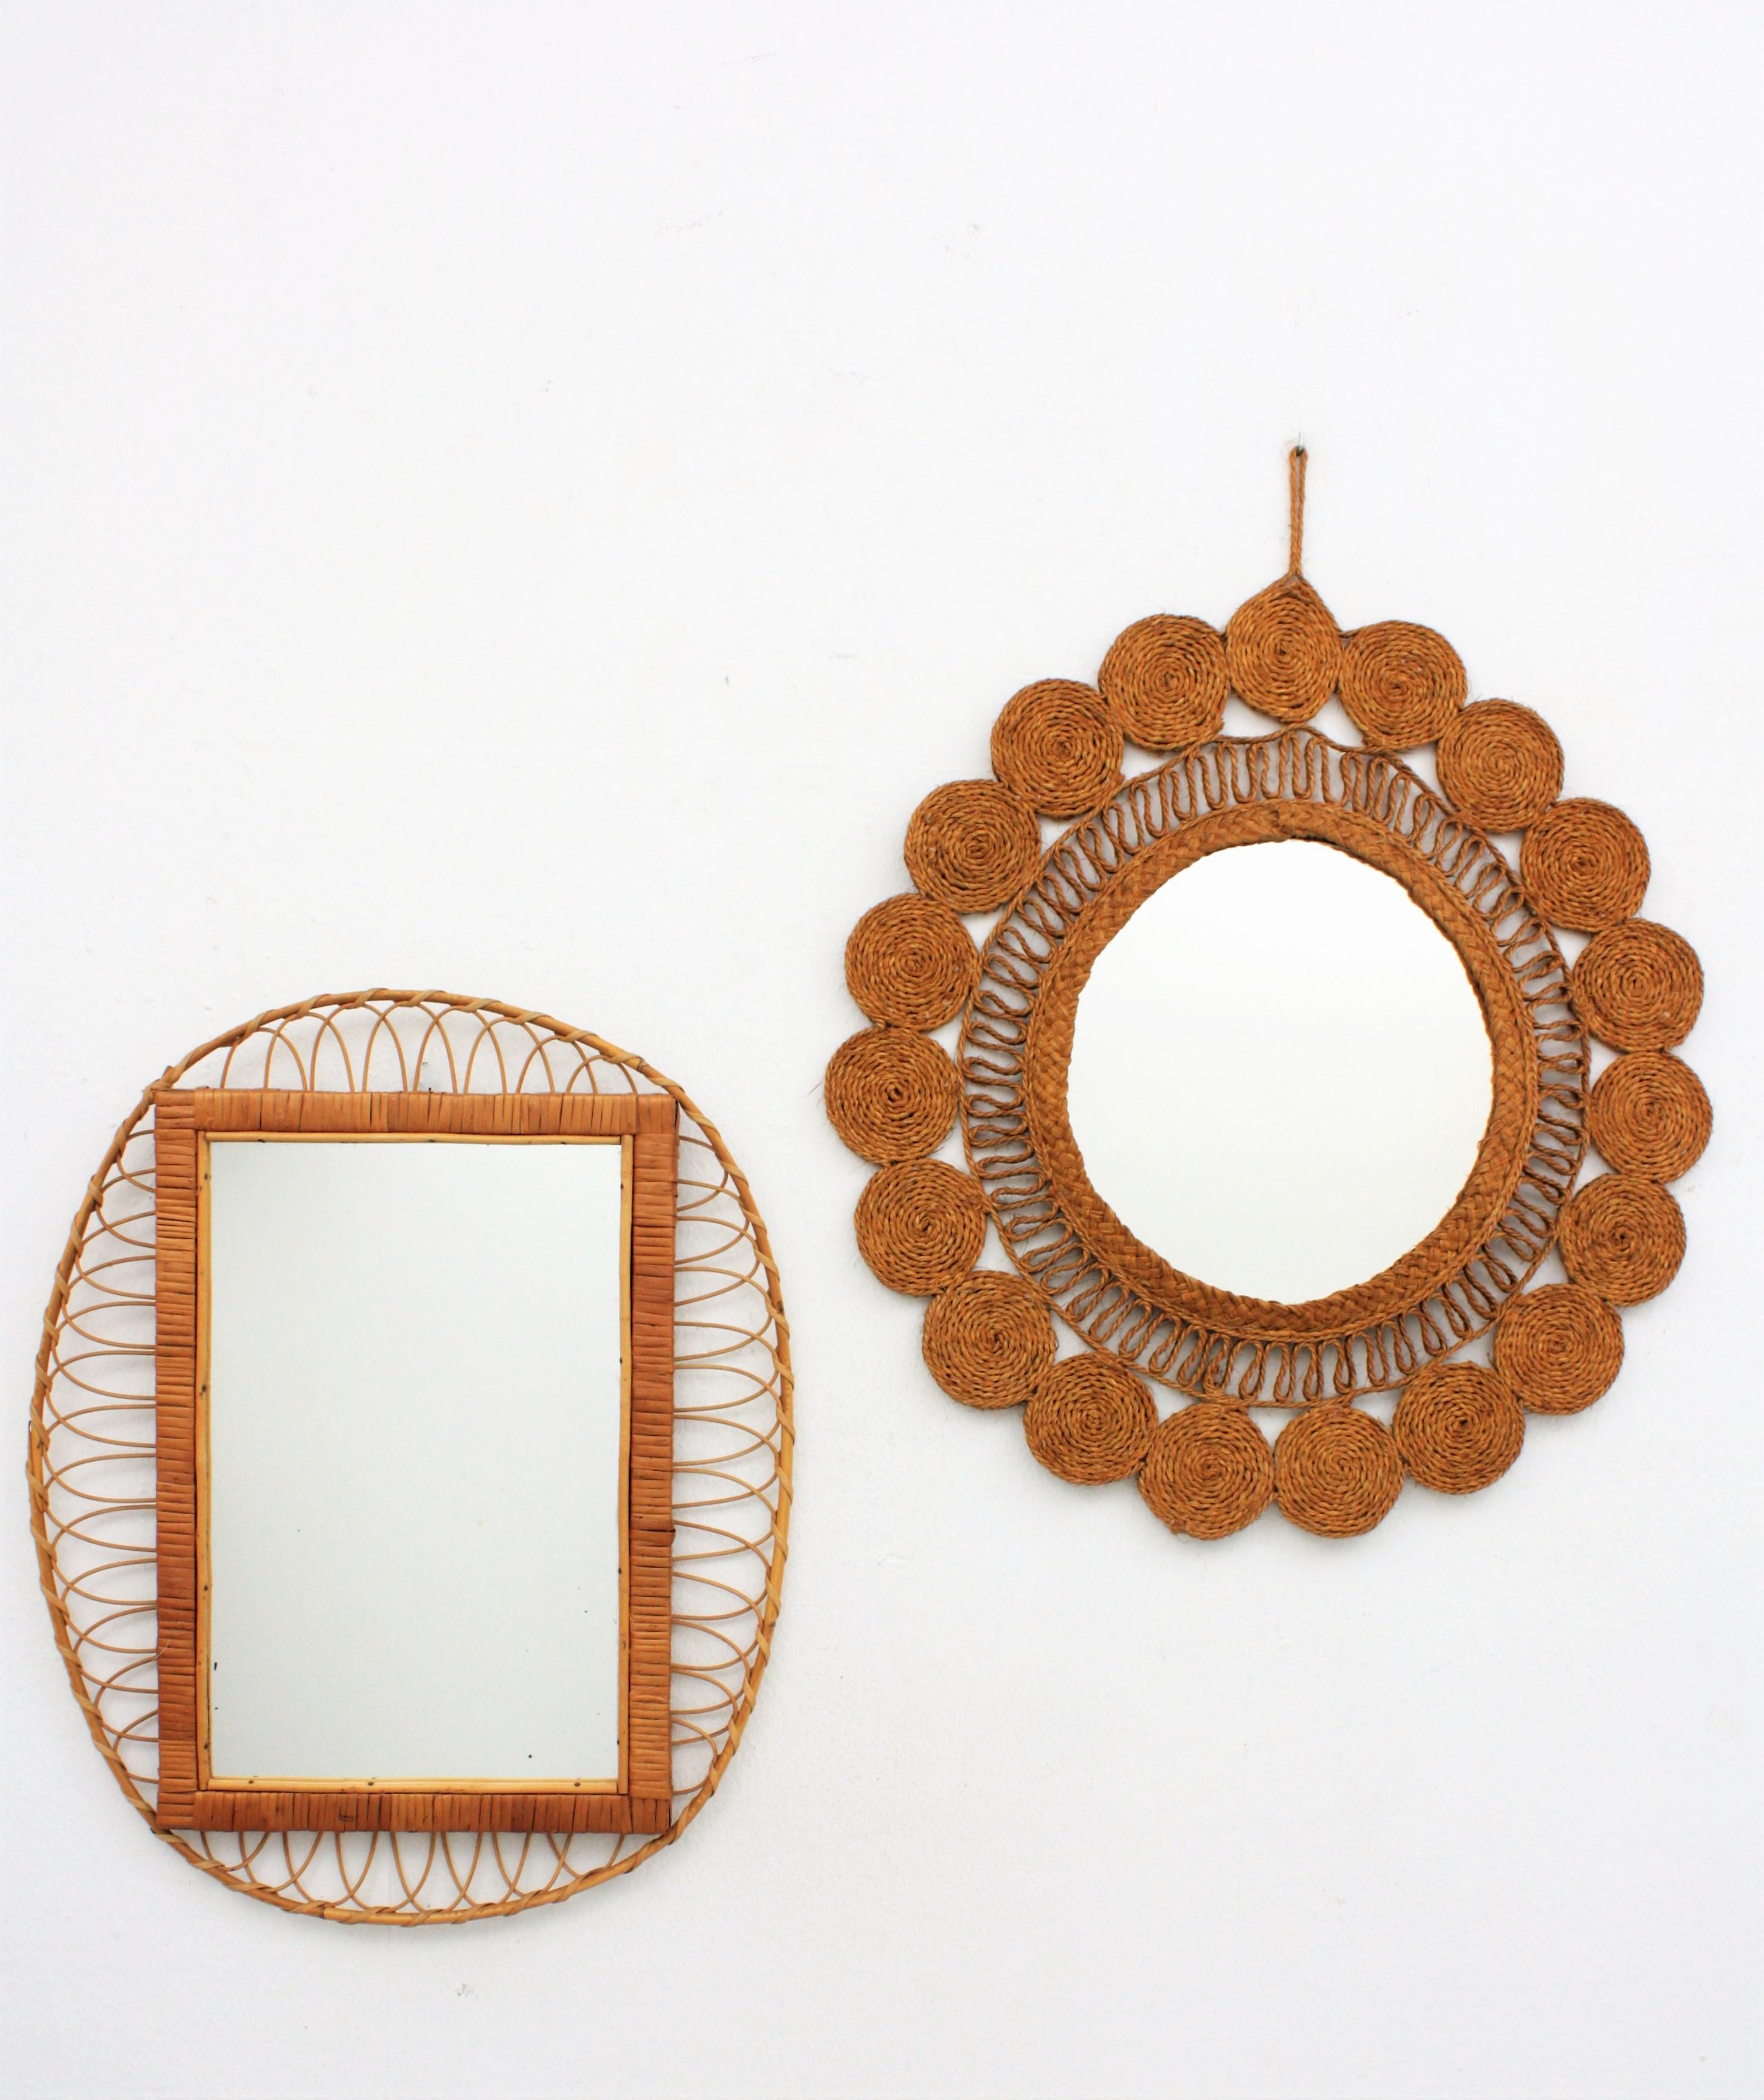 20th Century French Rattan Oval Mirror with Woven Rectangular Frame, 1960s For Sale